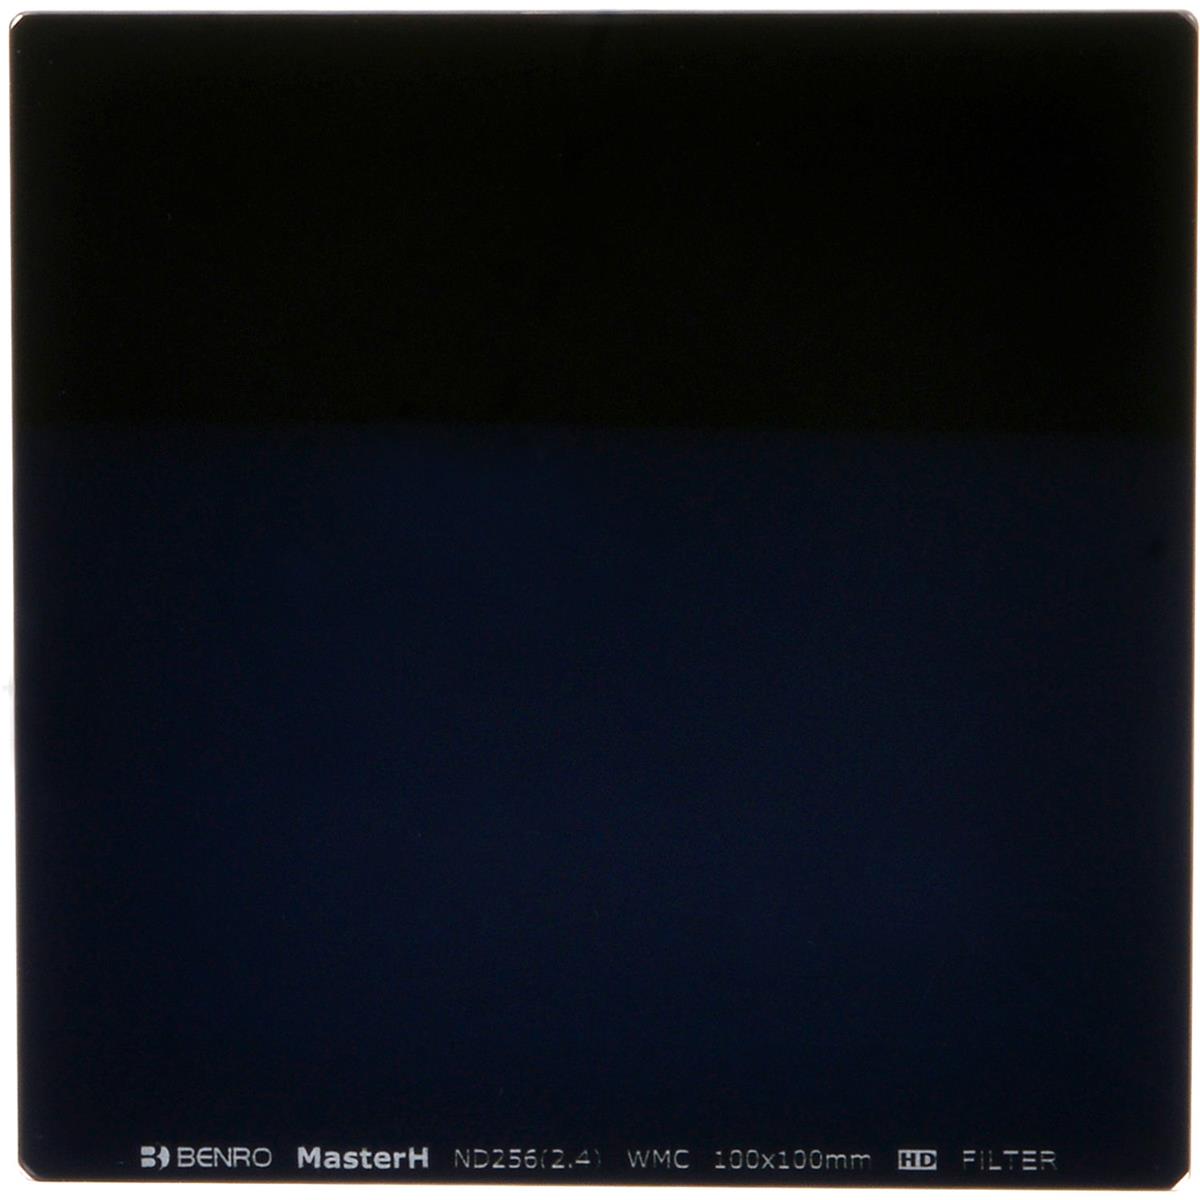 Image of Benro 100x100mm Master Hardened Glass 2.4 ND Filter